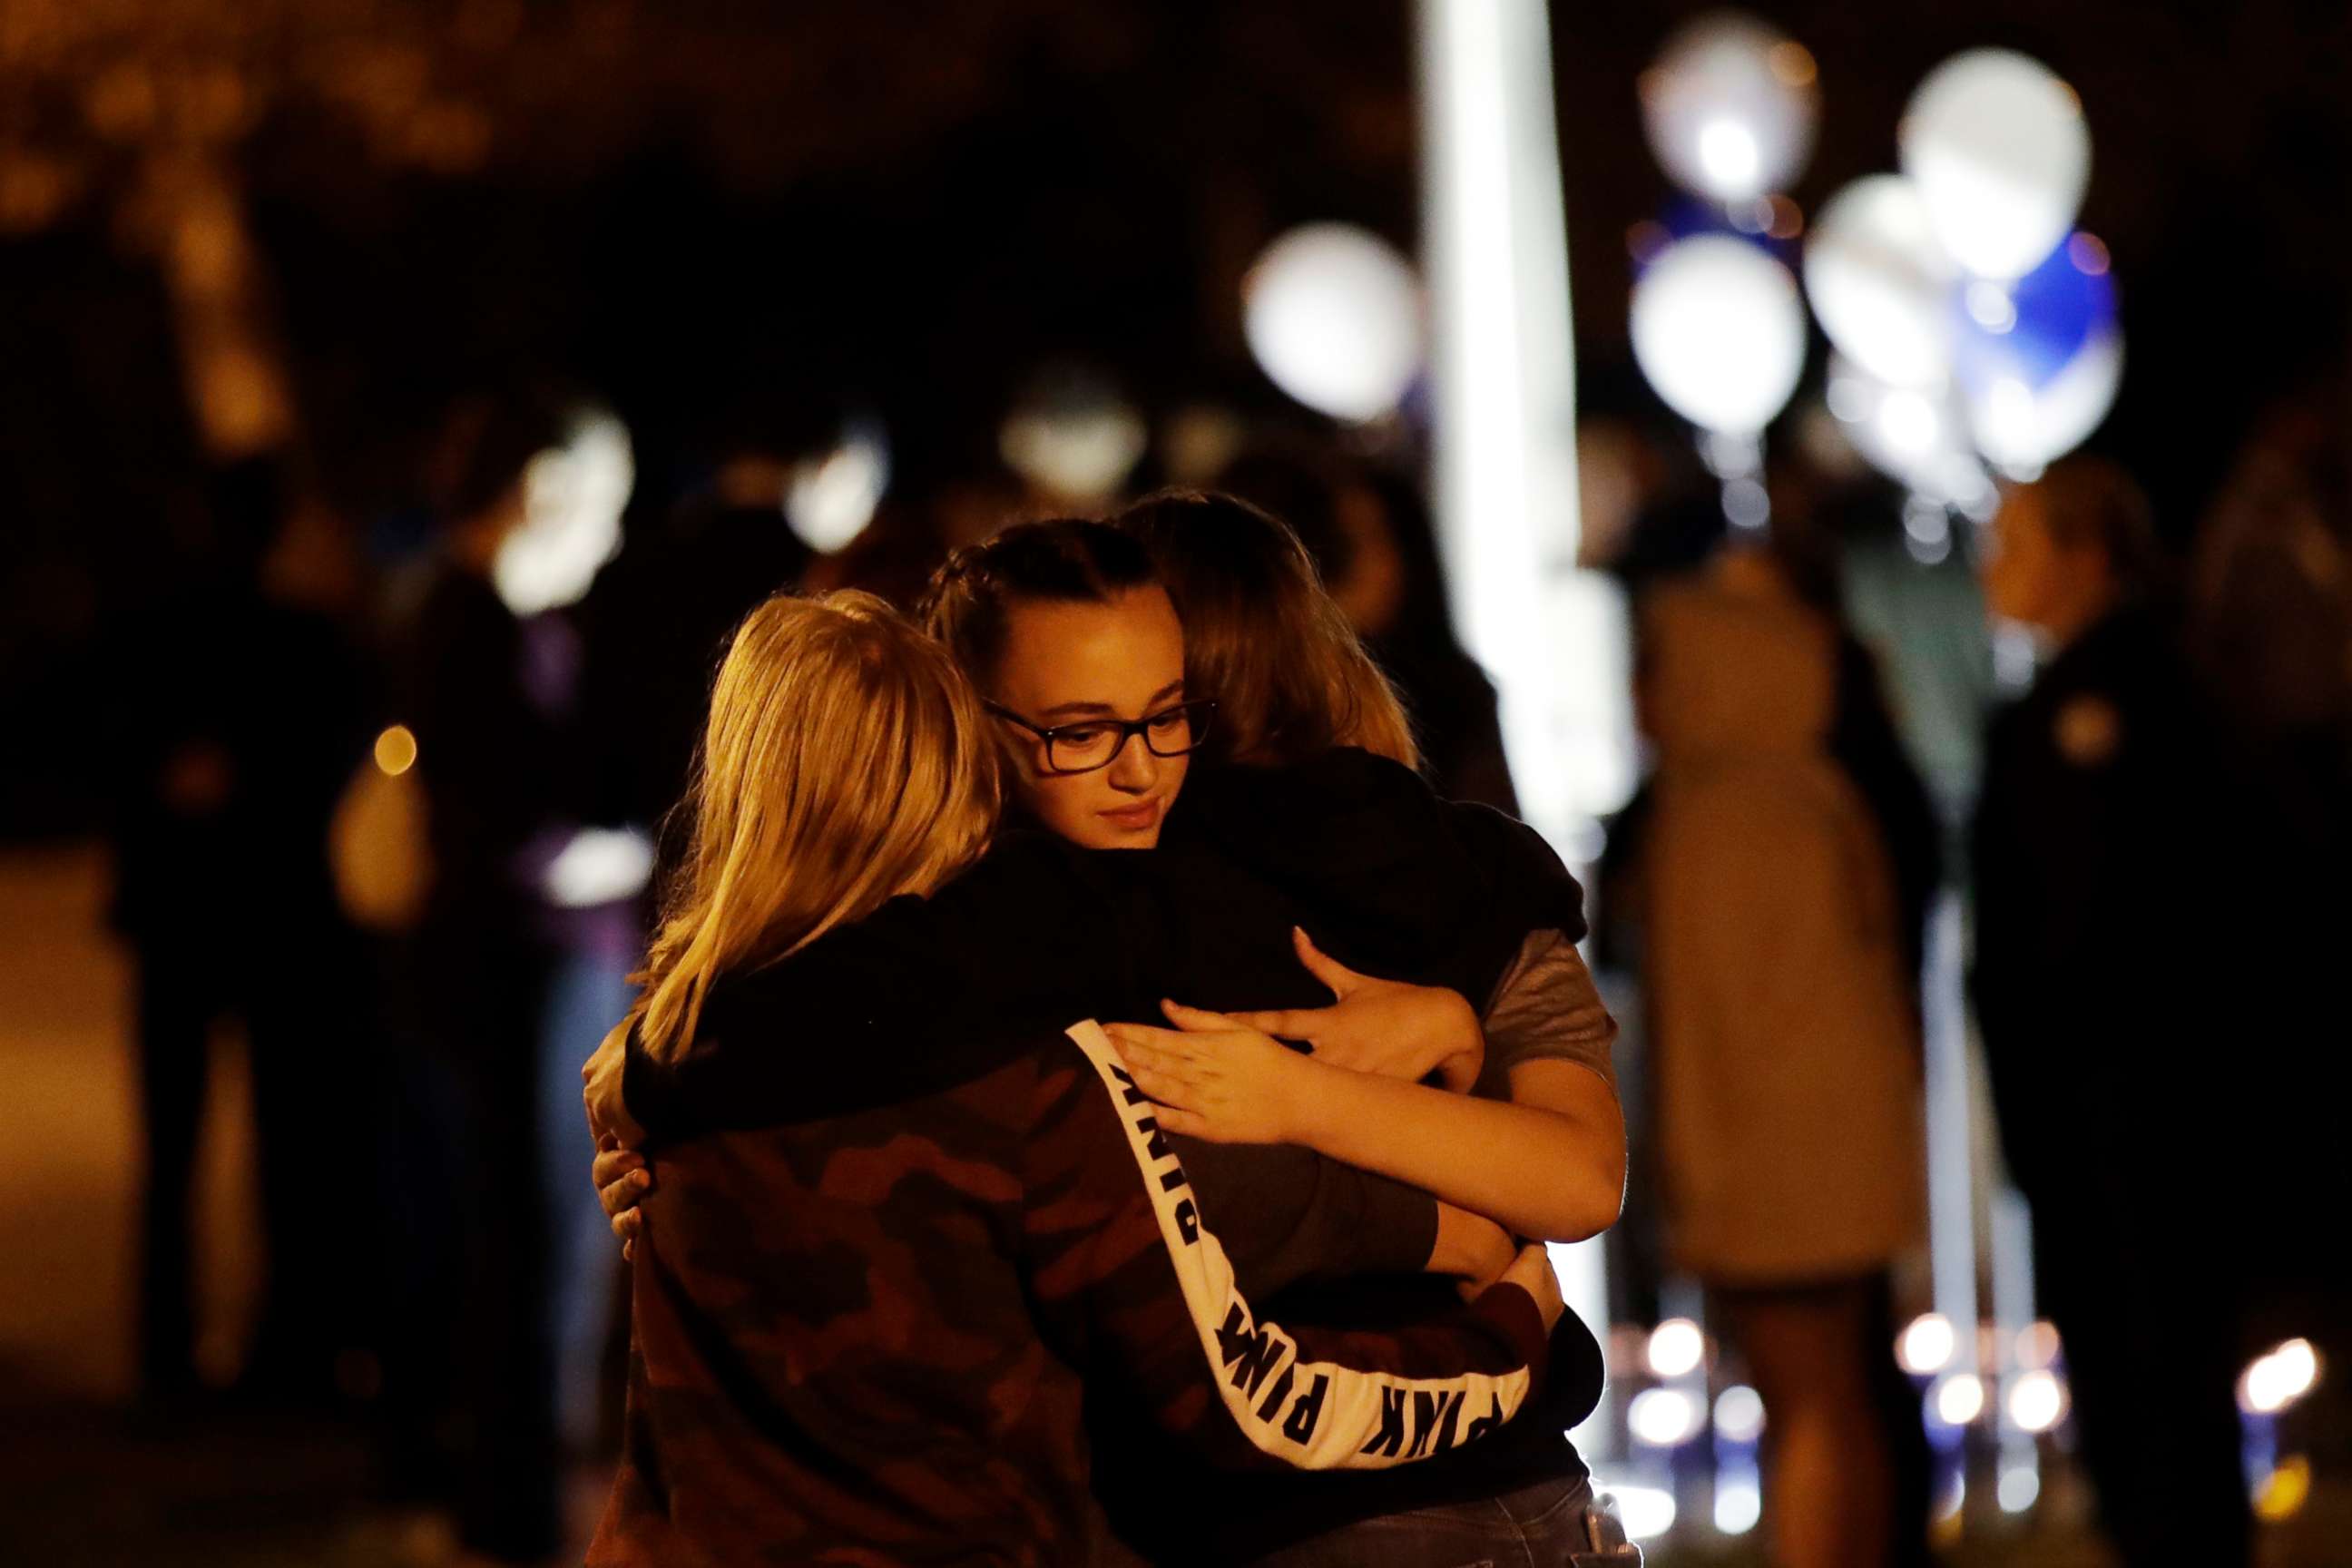 PHOTO: Students embrace during a vigil at Central Park in the aftermath of a shooting at Saugus High School in Santa Clarita, Calif., Nov. 14, 2019.